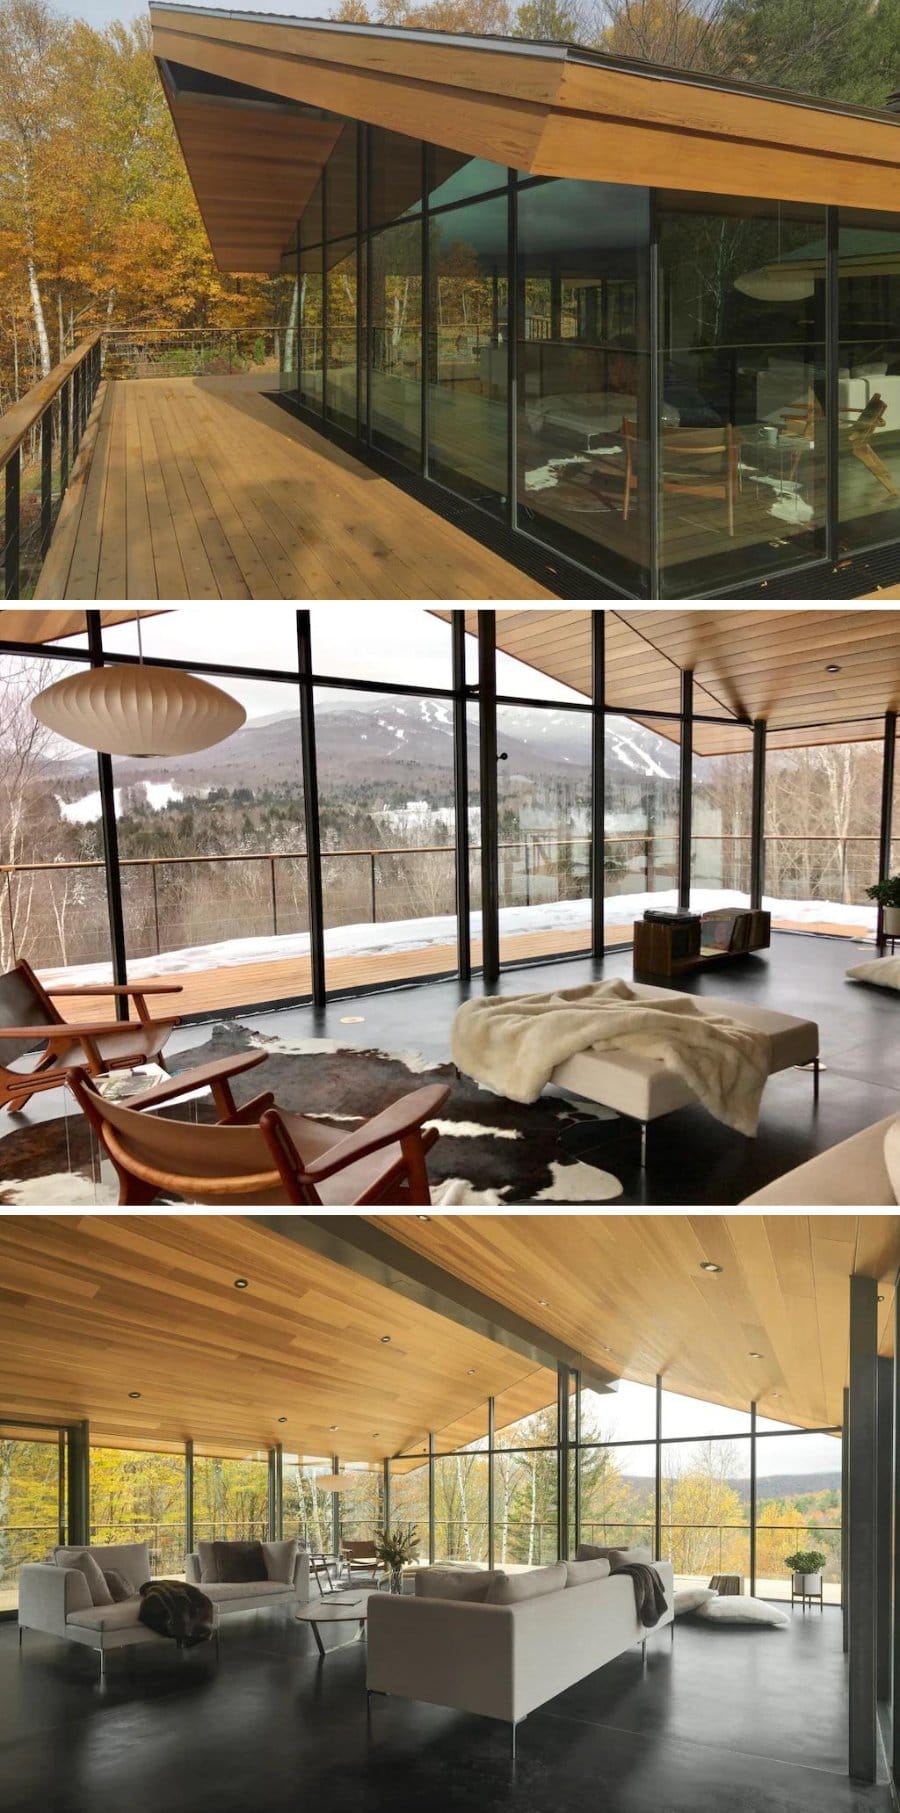 Interior and exterior images of the Stowe Glass House in Stowe, Vermont